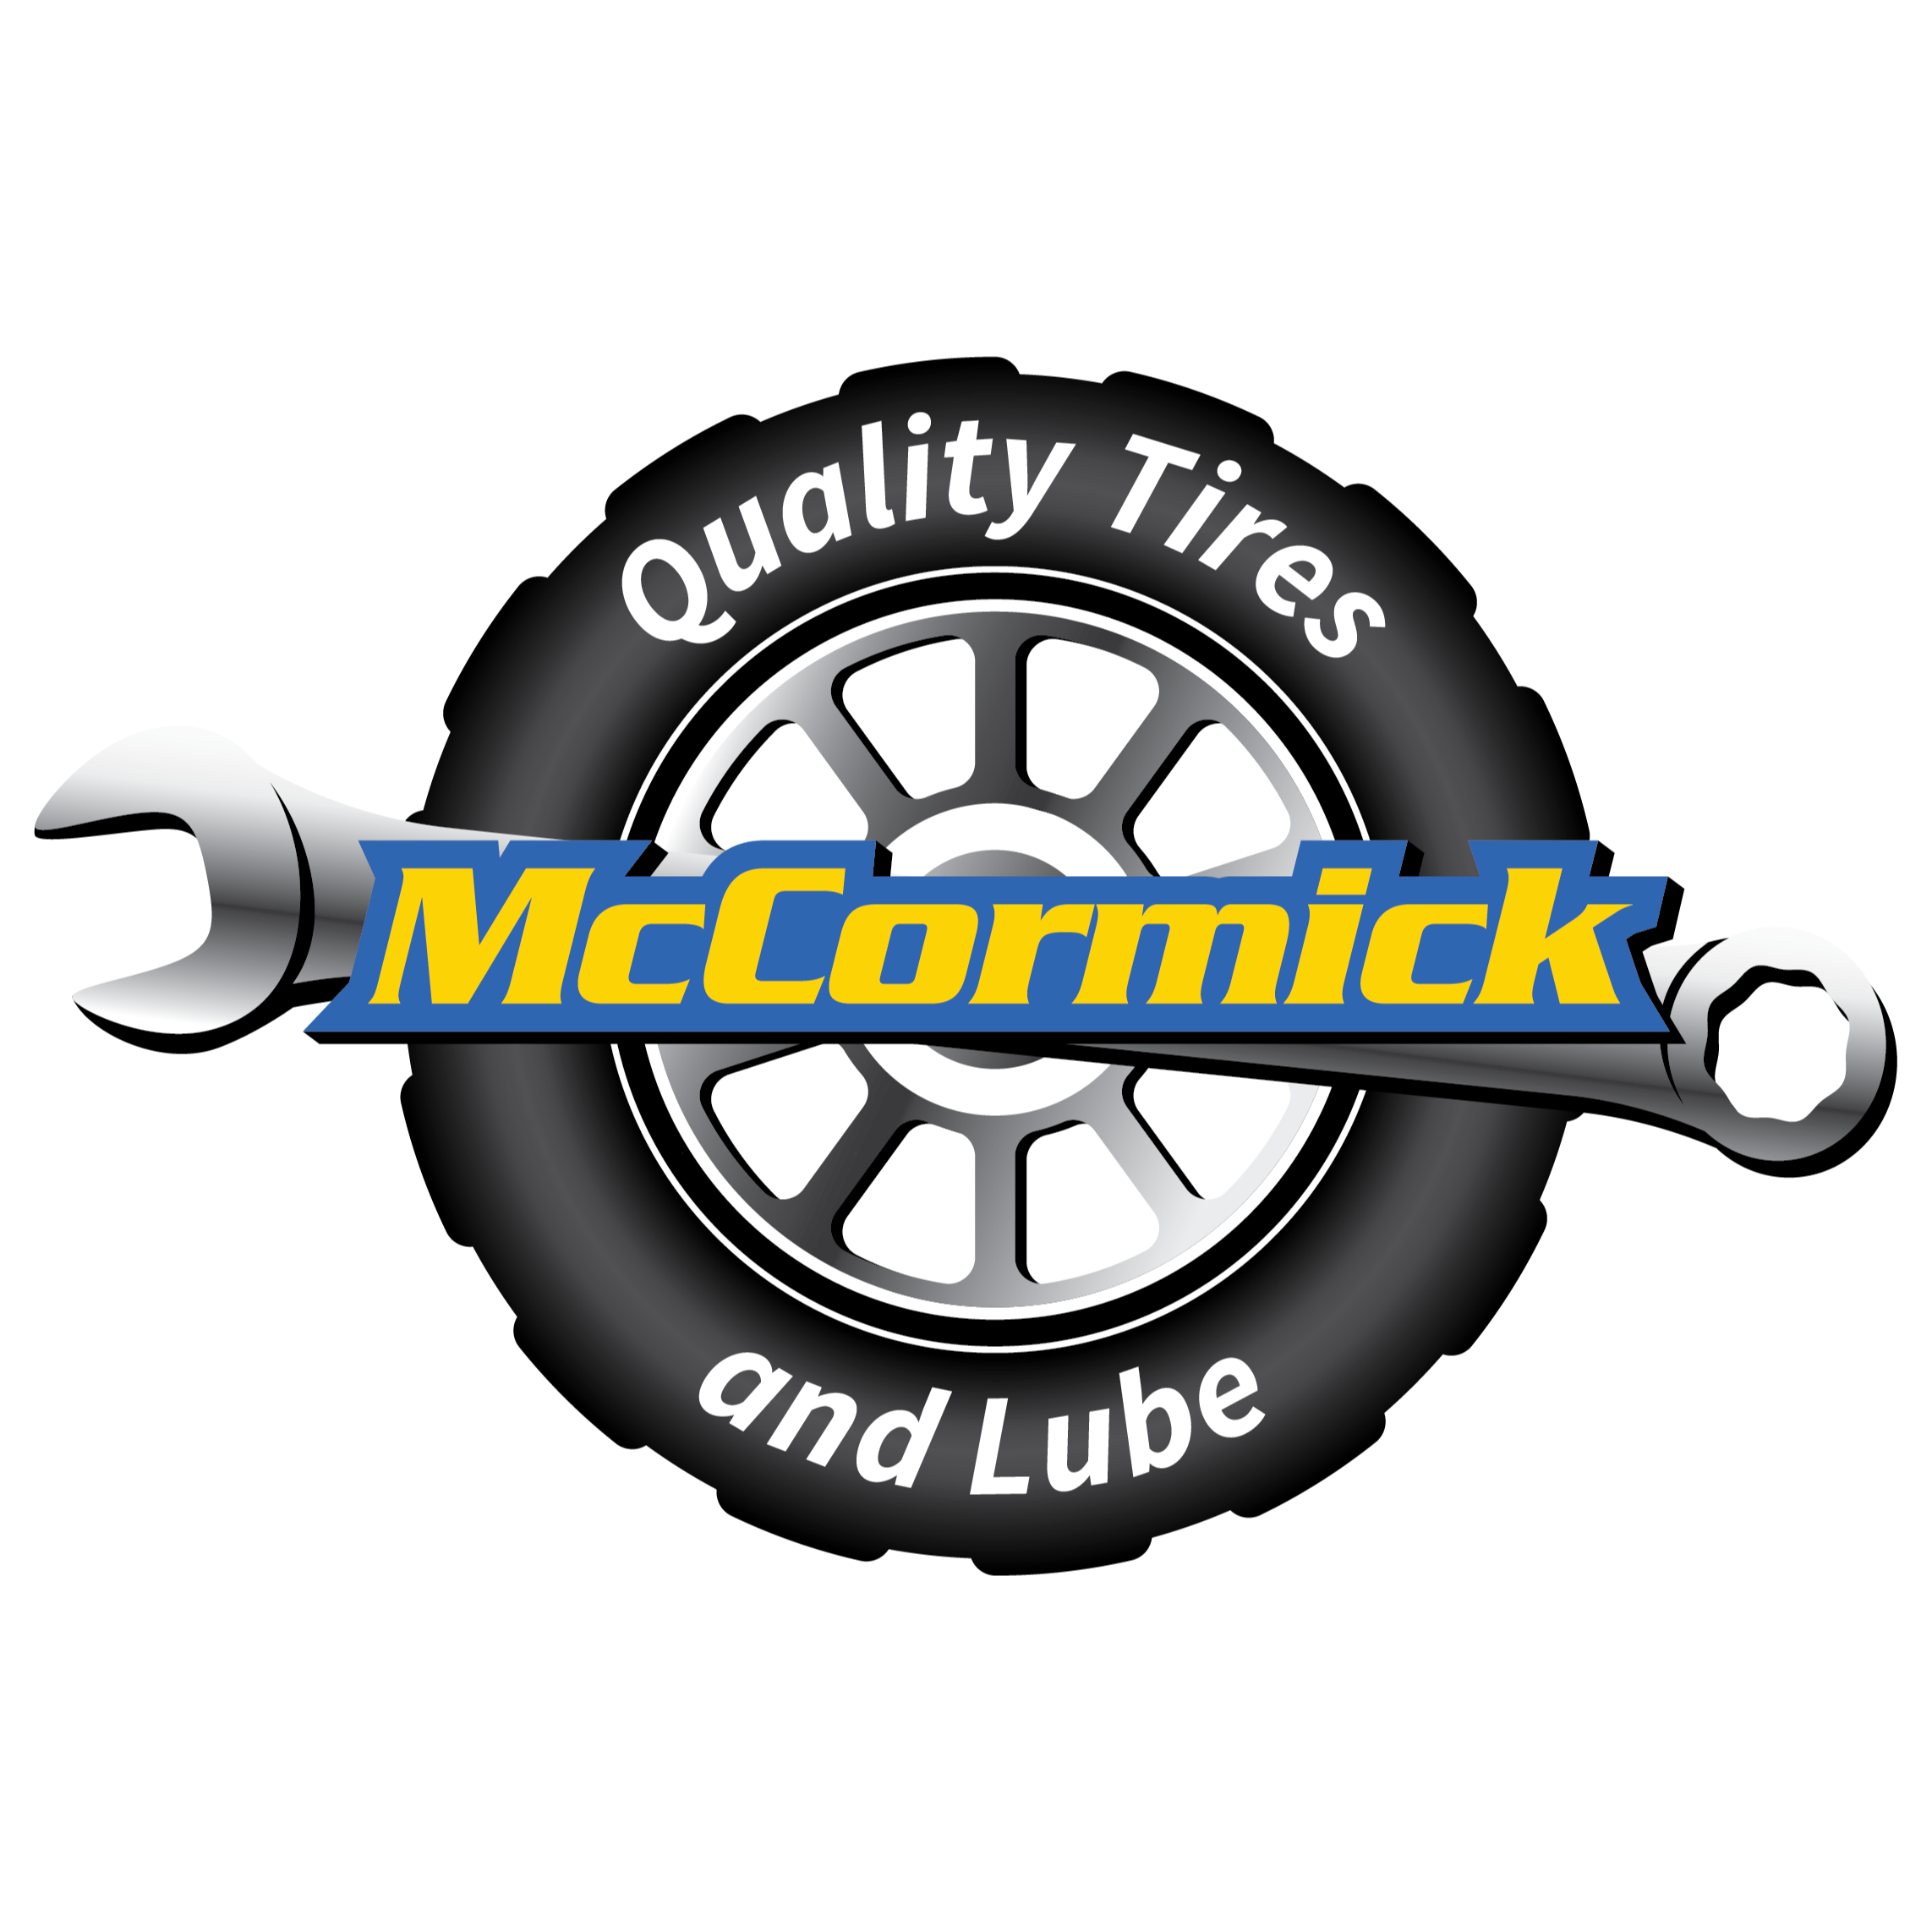 McCormick Quality Tires and Lube - Fort Collins, CO 80526 - (970)472-2031 | ShowMeLocal.com